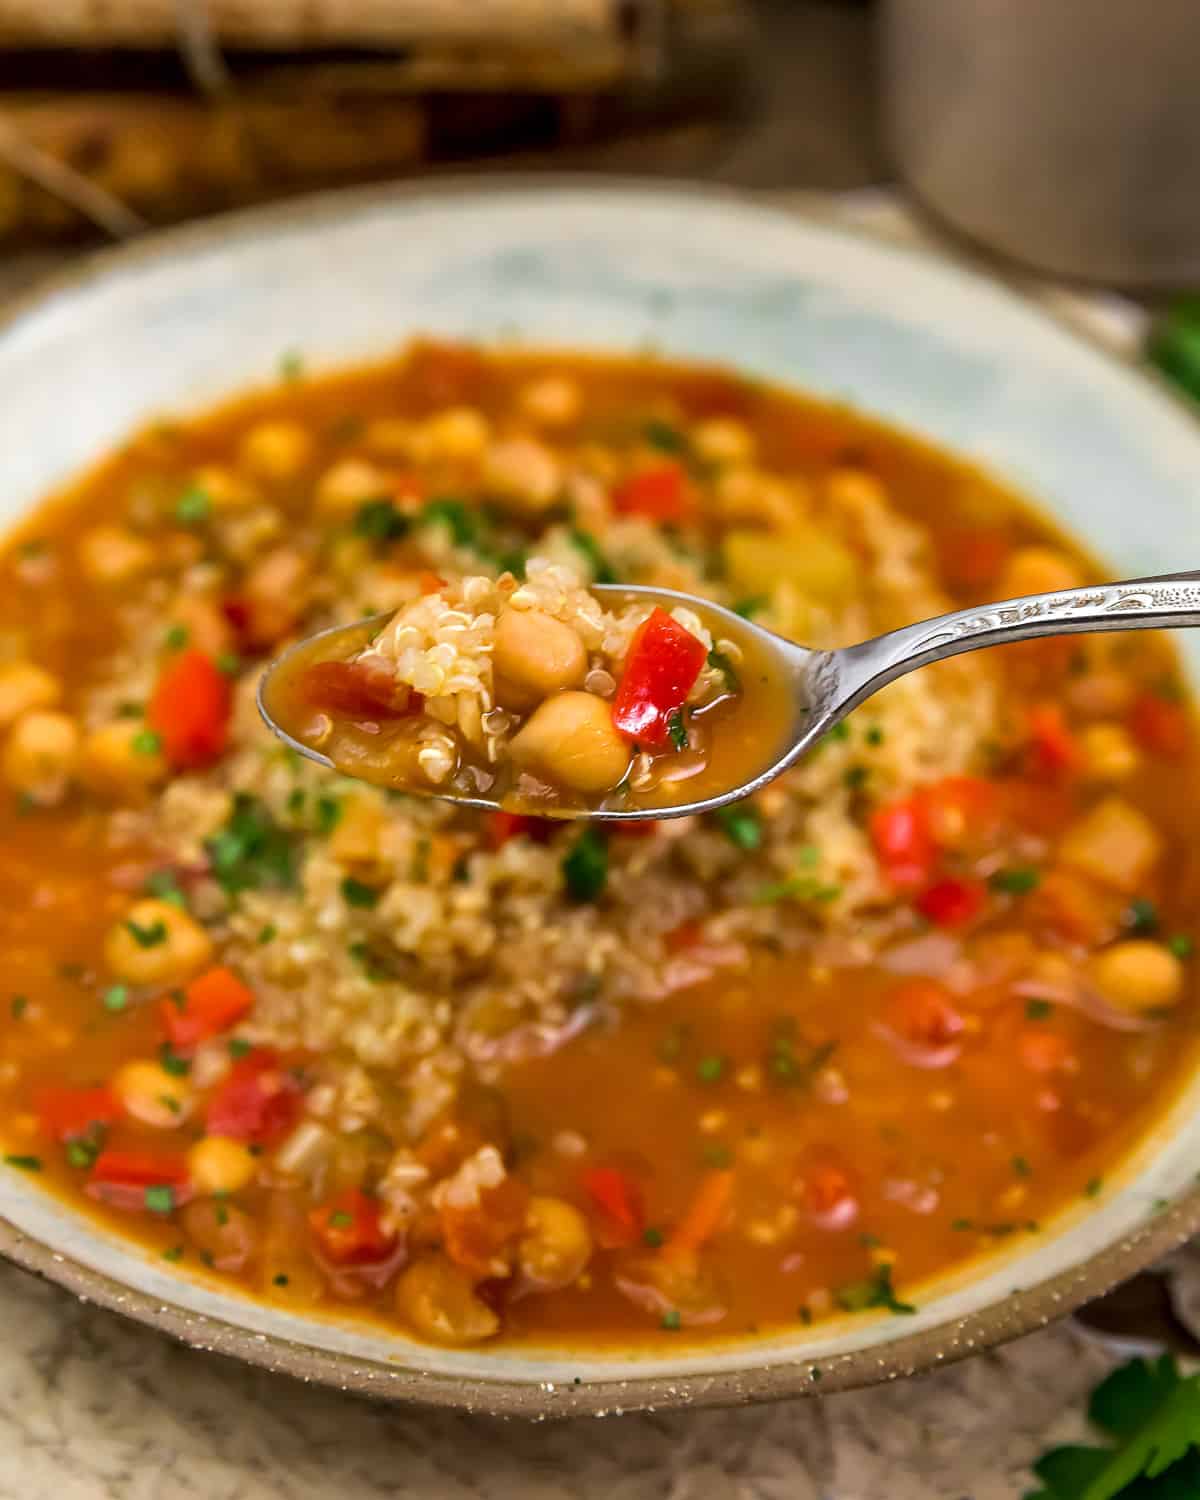 Spoonful of Chickpea Red Pepper Soup with Quinoa